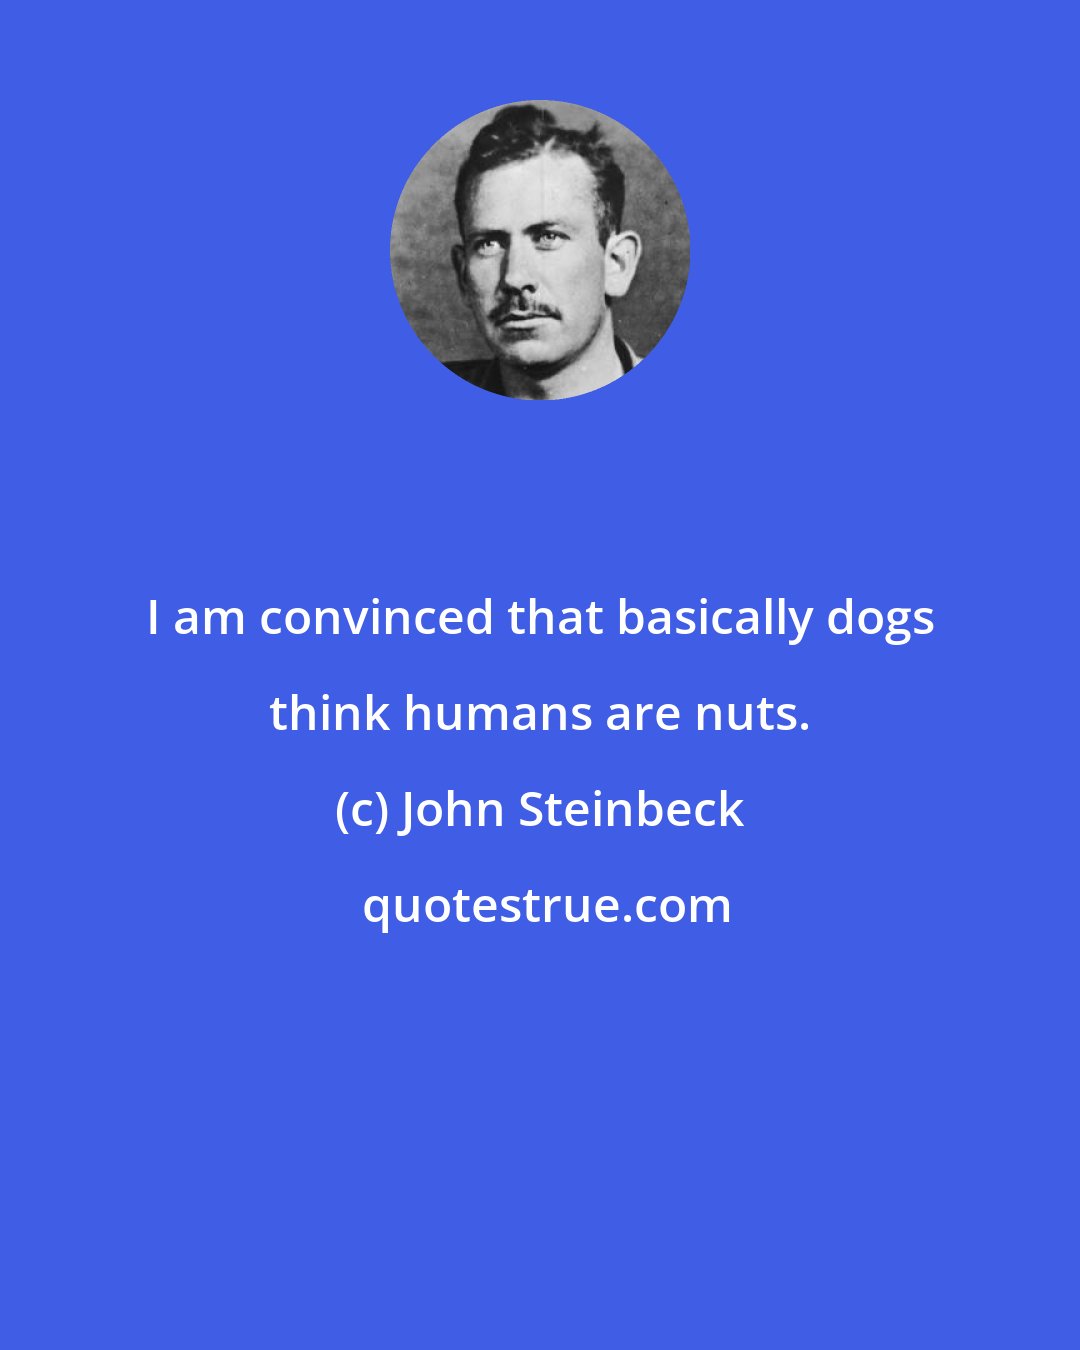 John Steinbeck: I am convinced that basically dogs think humans are nuts.